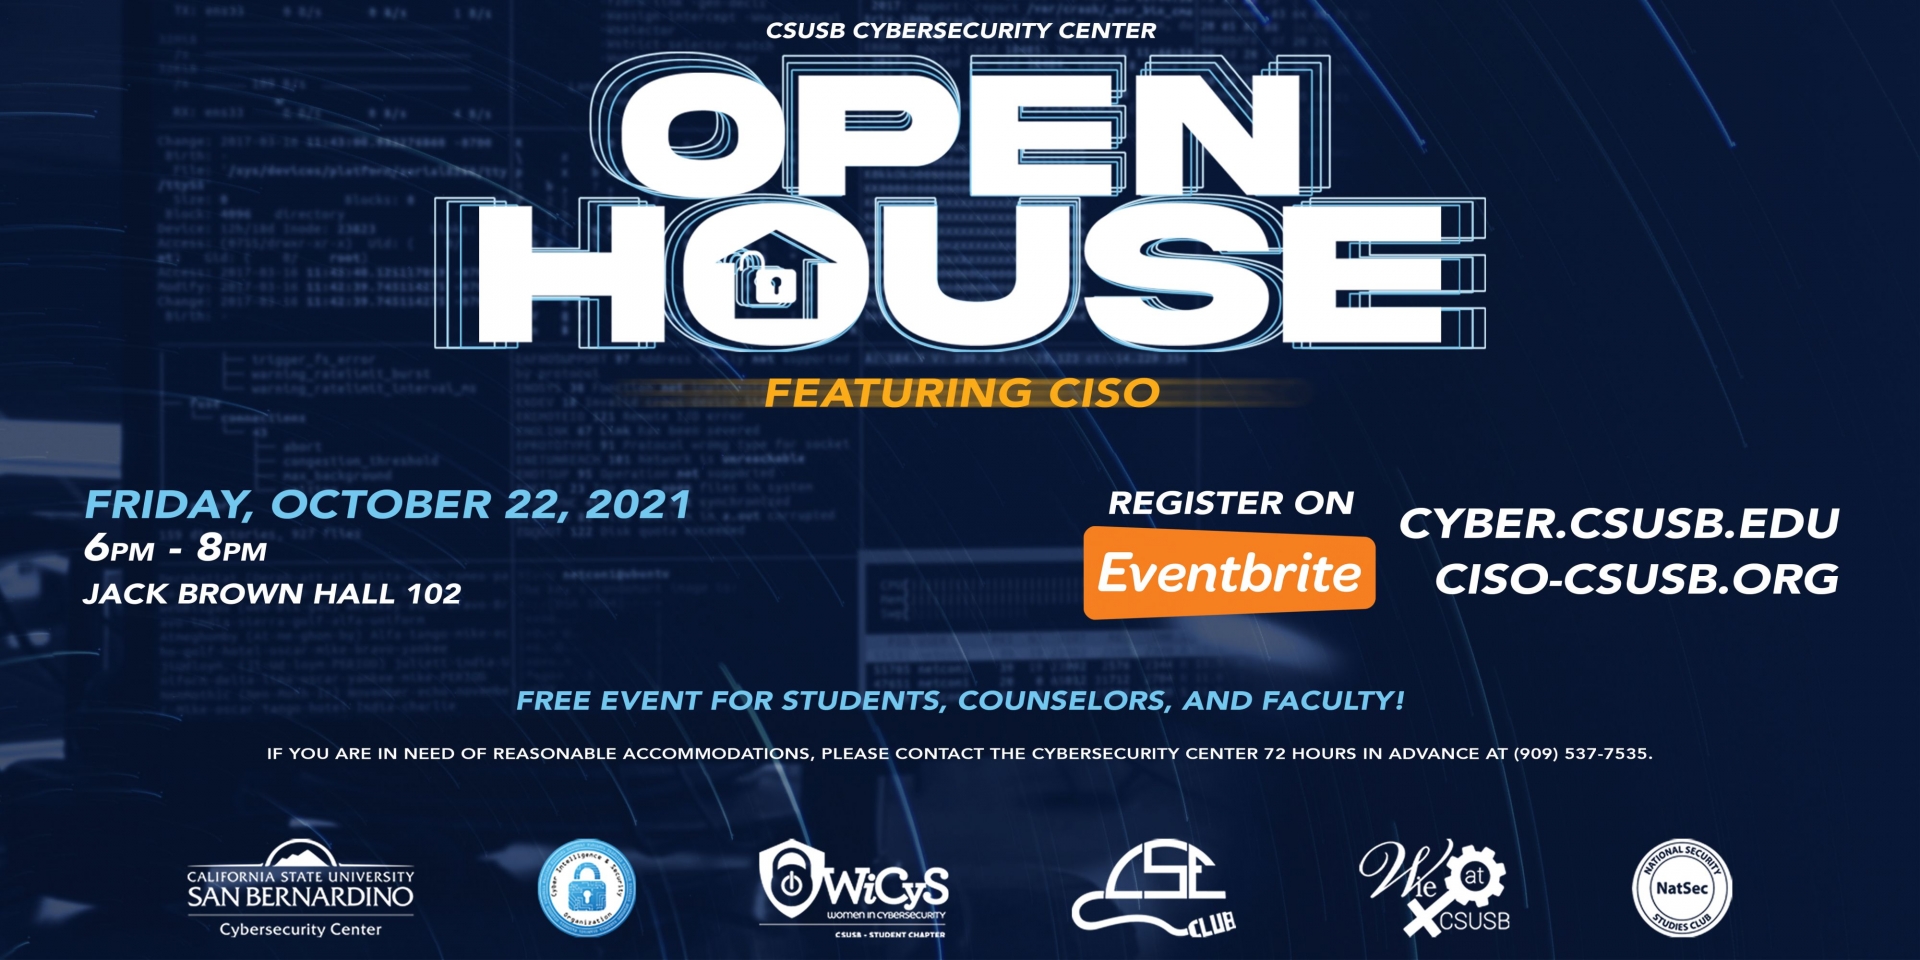 CSUSB Cybersecurity Center Open House Oct 22nd 6pm Register on Eventbrite